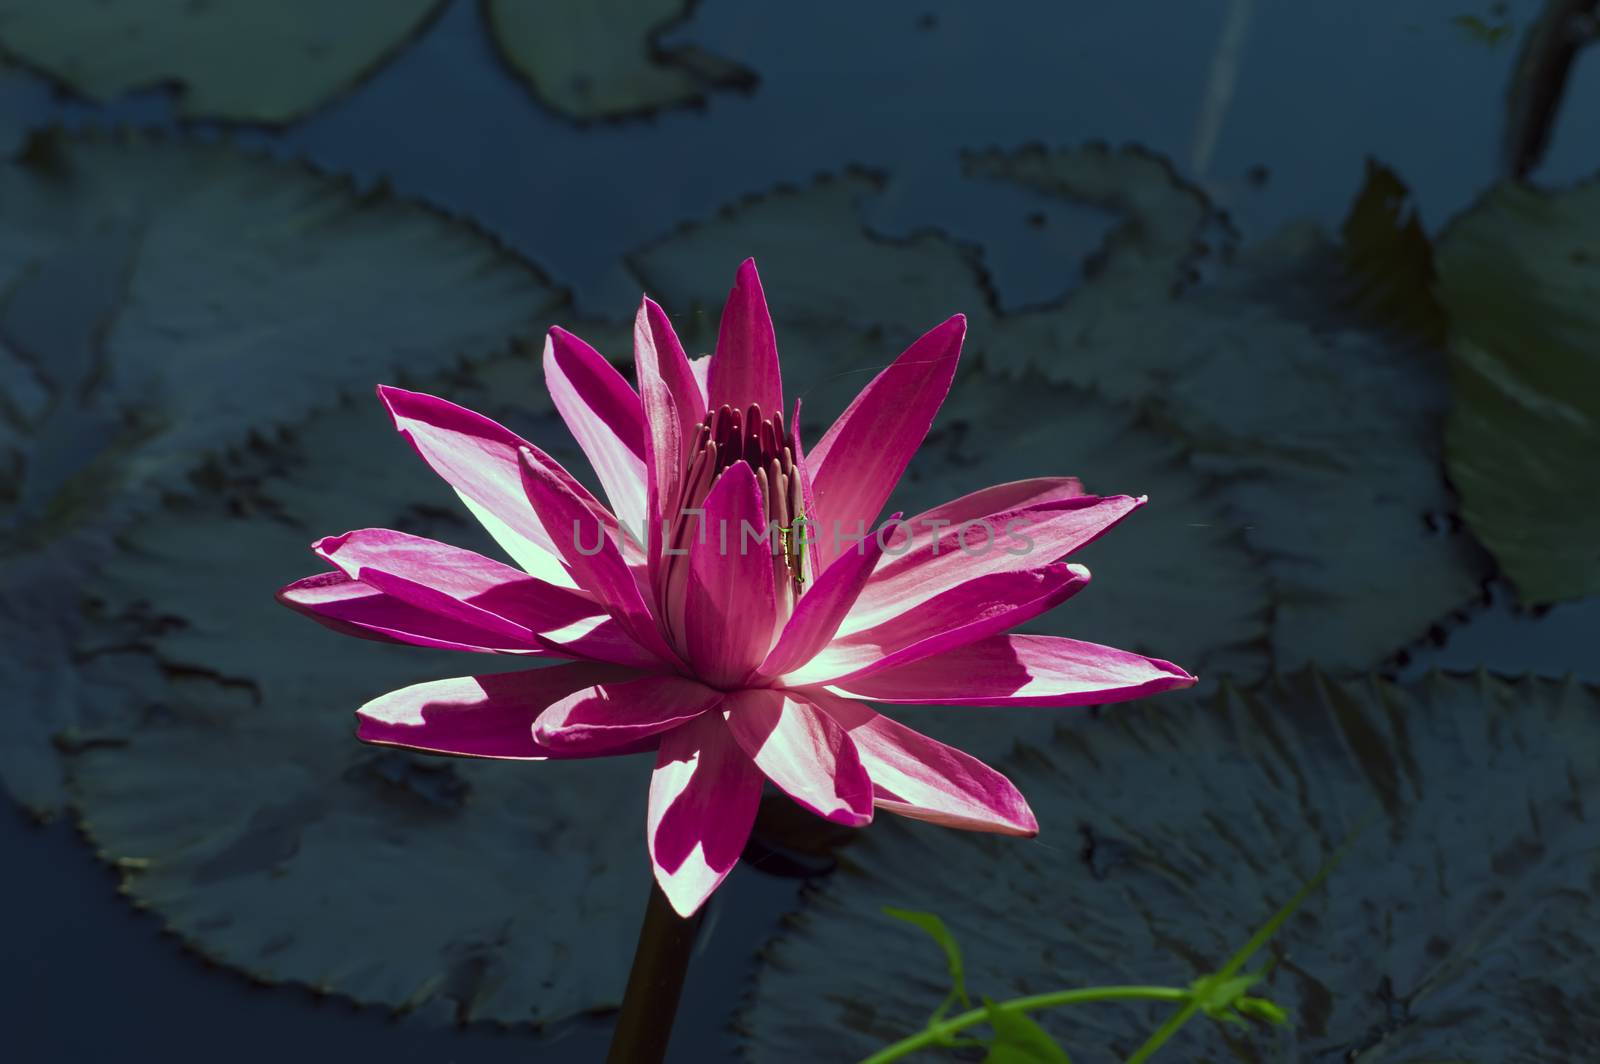 Grasshopper and Nymphaea Flower. by GNNick